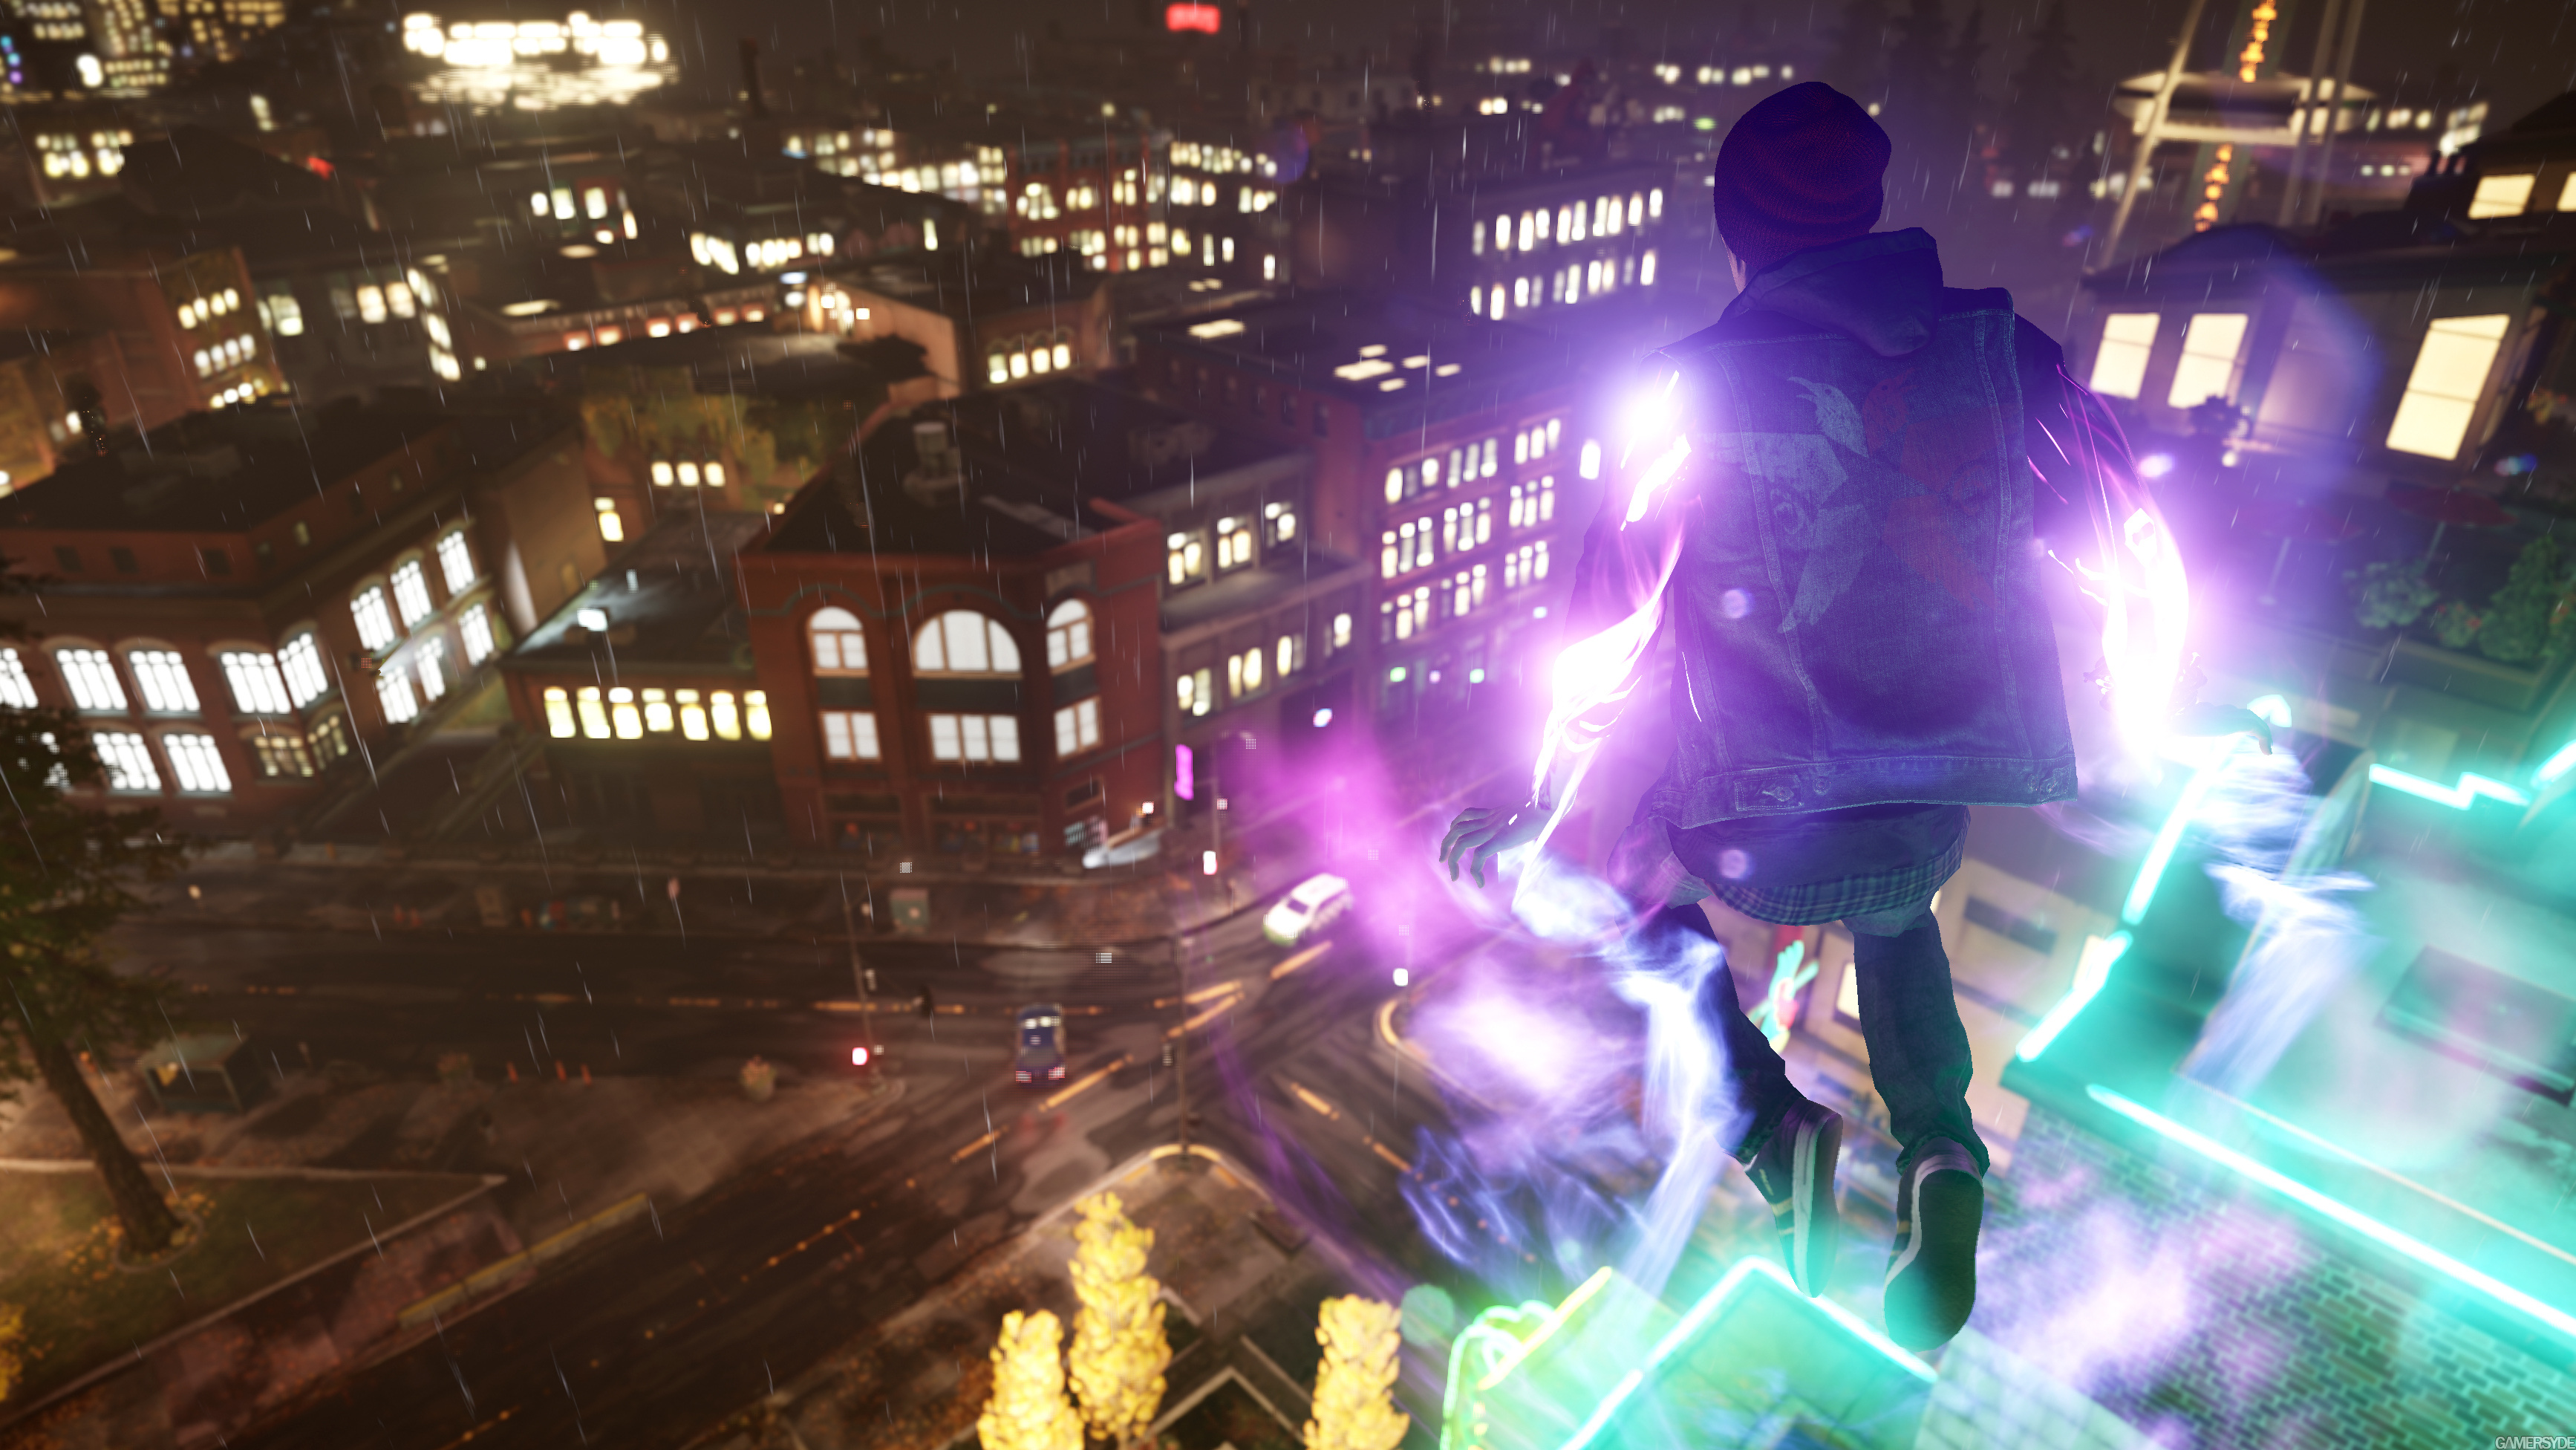 image_infamous_second_son-23816-2661_0004.jpg